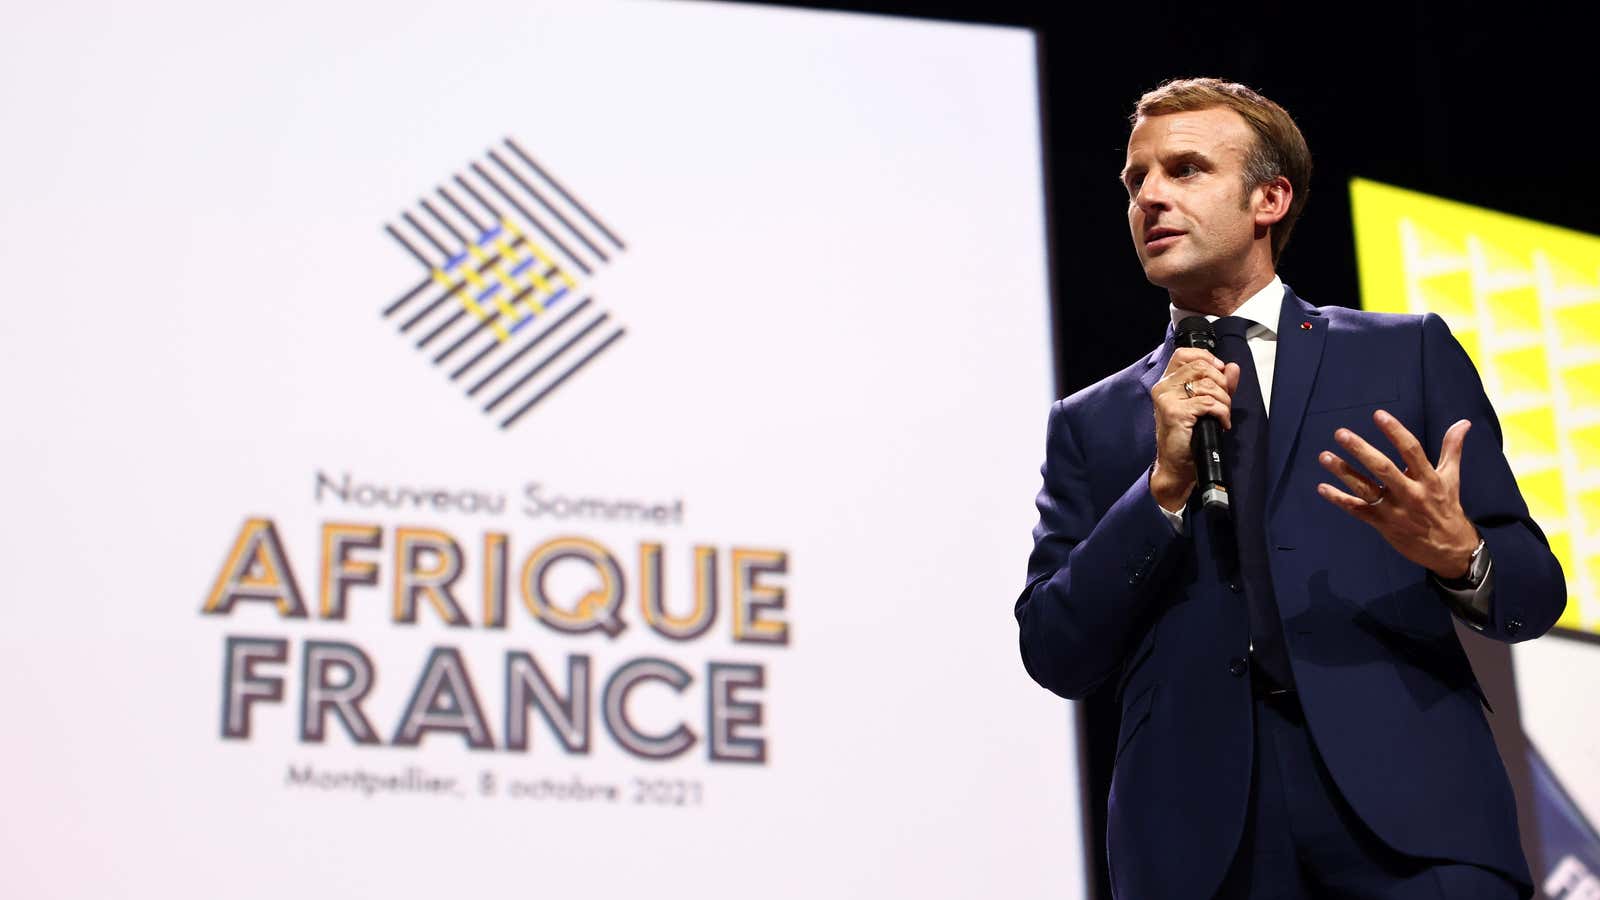 Macron ushering in a new Africa-France summit